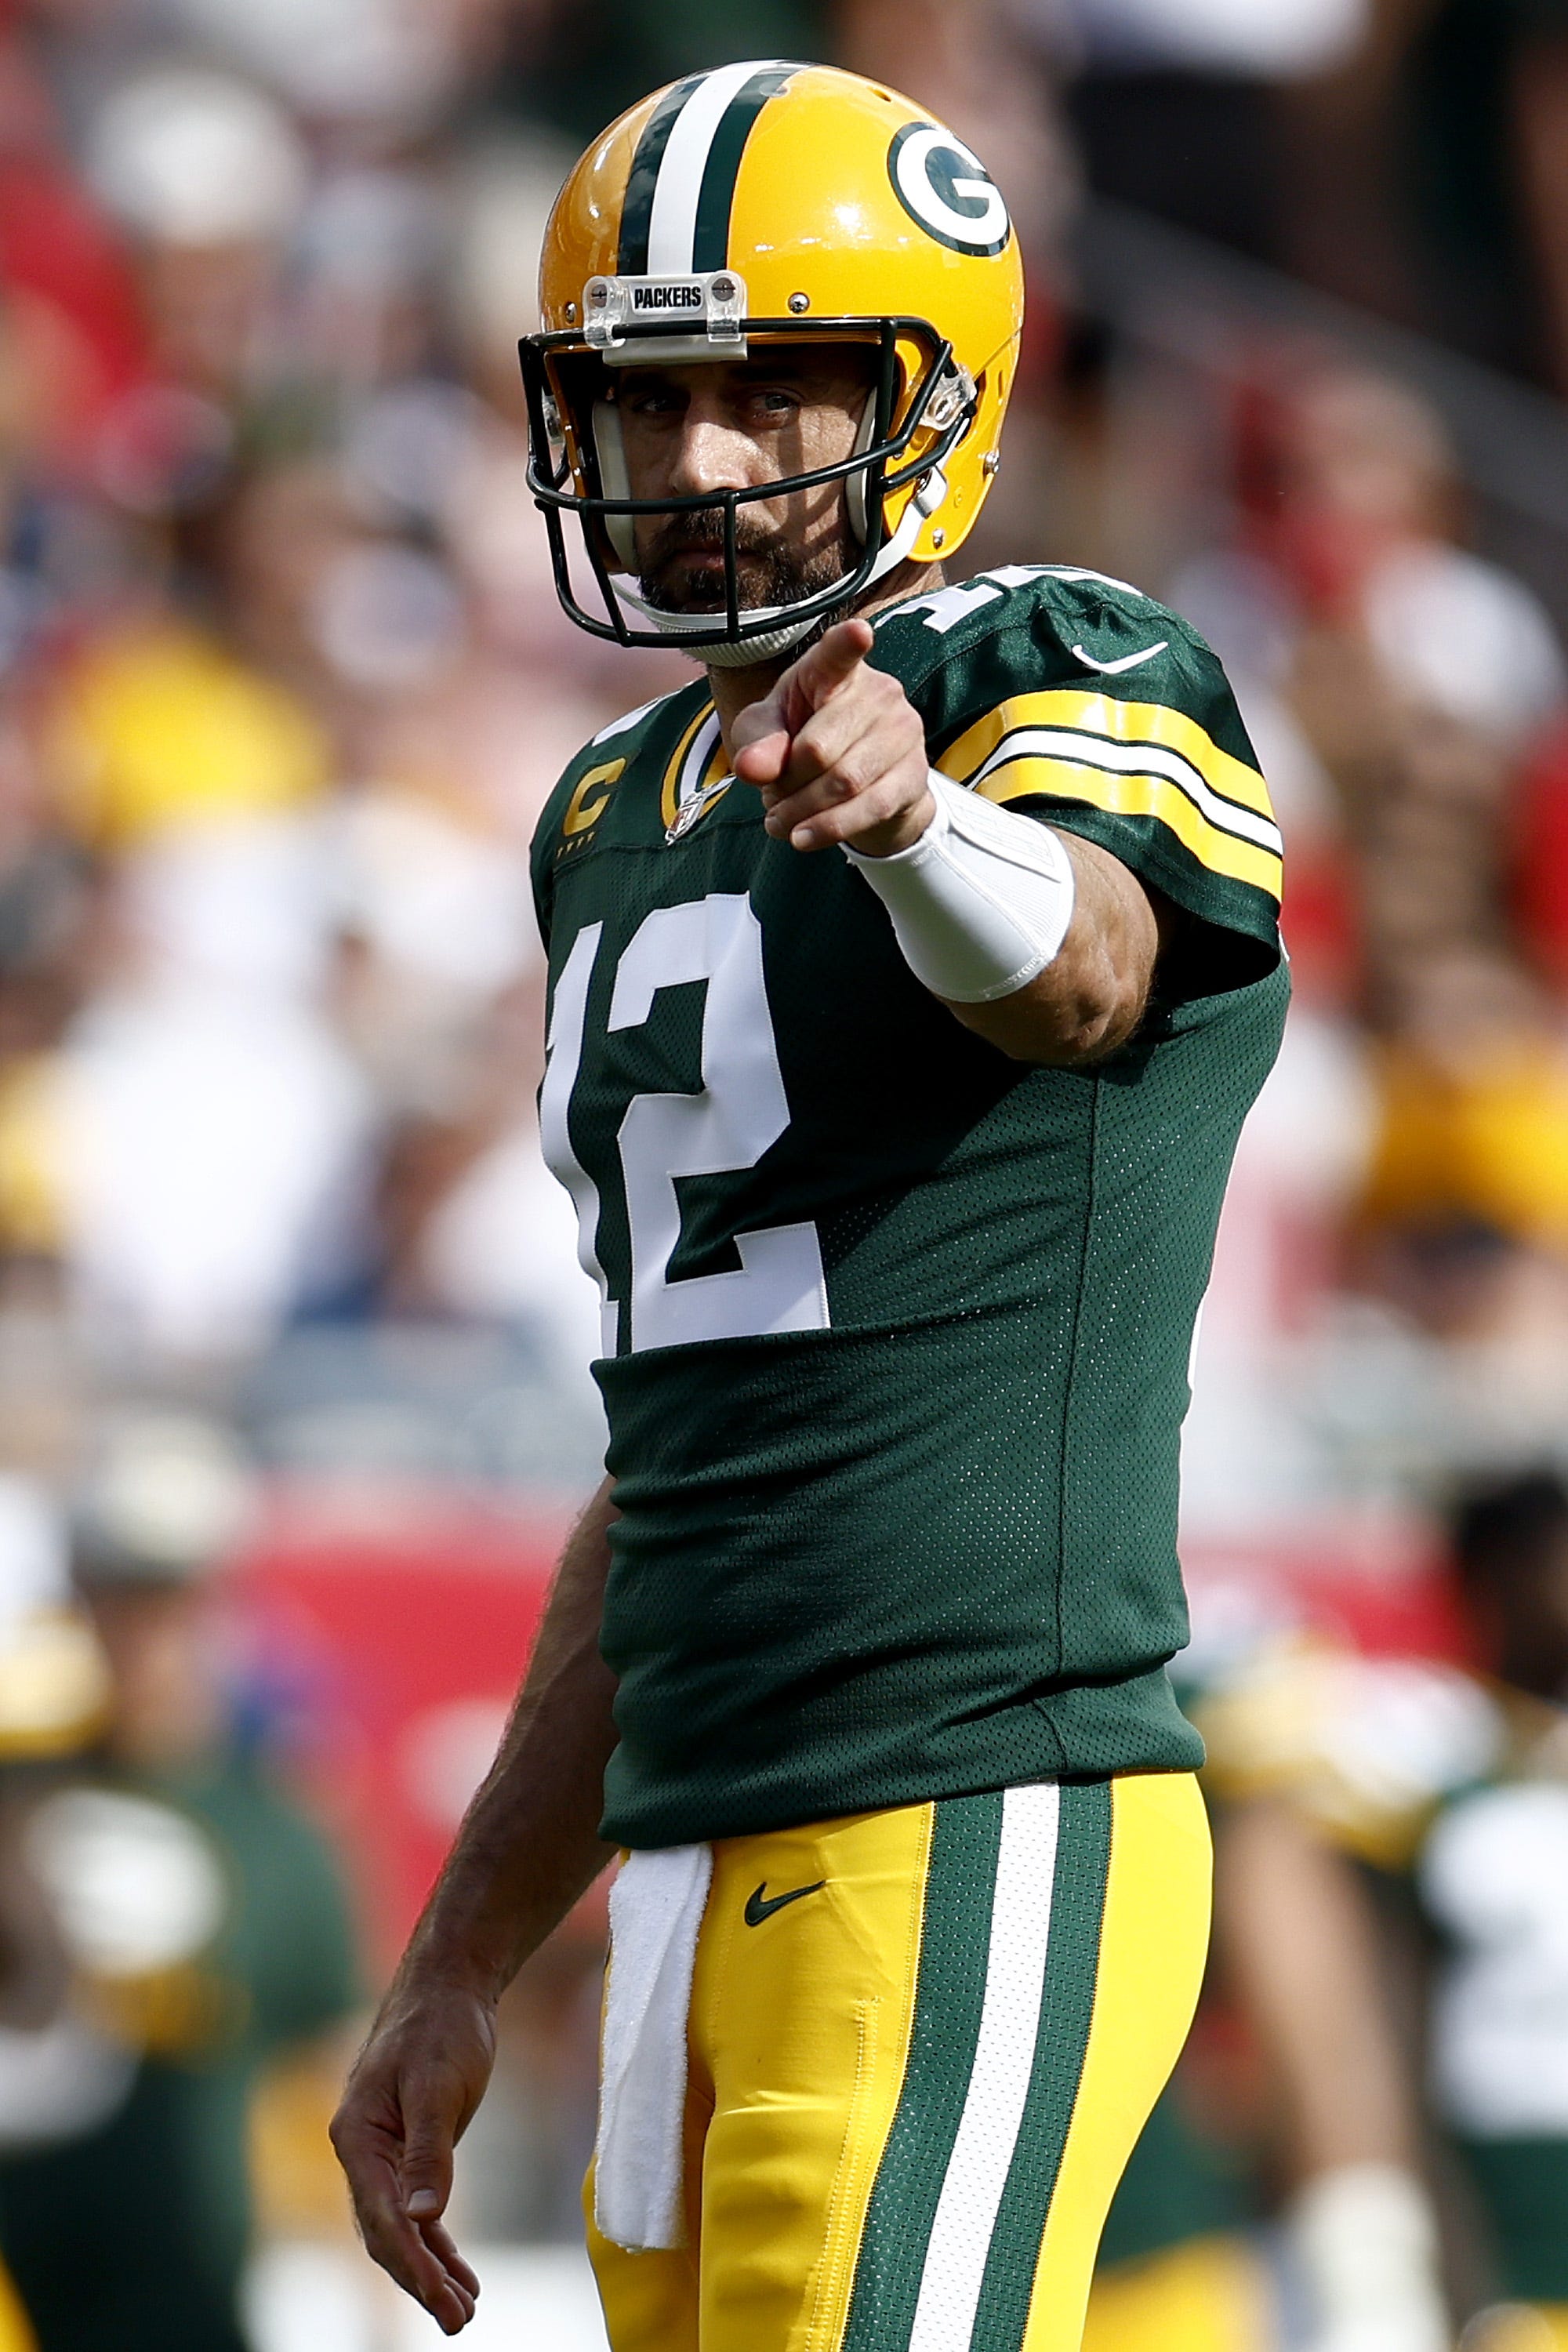 Packers quarterback Aaron Rodgers completed 15 for 18 passes with two touchdowns in the first half against the Tampa Bay Buccaneers in the game on Sept. 25, 2022, at Raymond James Stadium in Tampa, Florida.